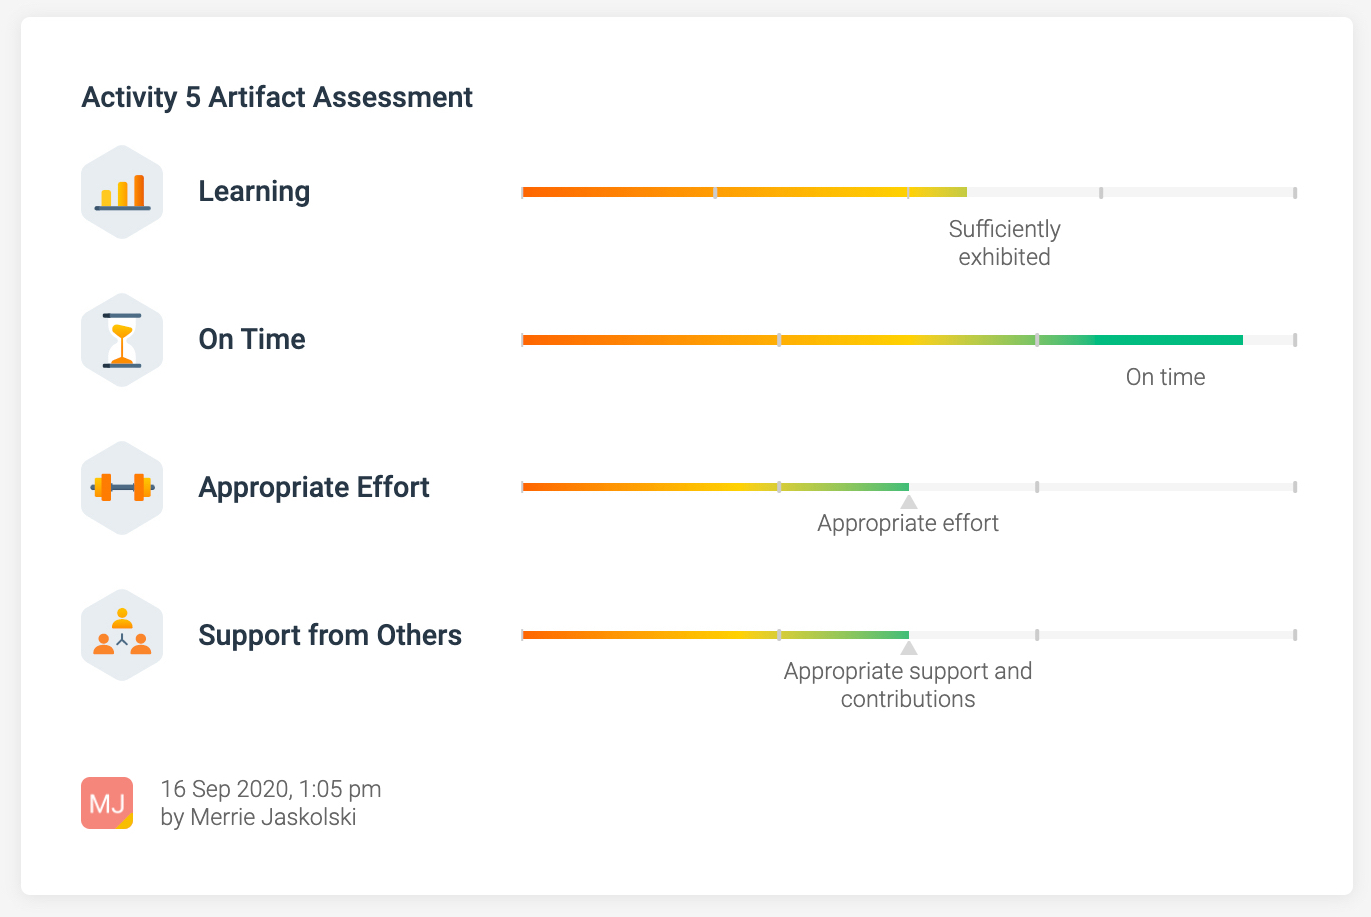 A sample artifact assessment screenshot shows a mentor's assessment of a student's work product on learning, timeliness, effort, and support from others.